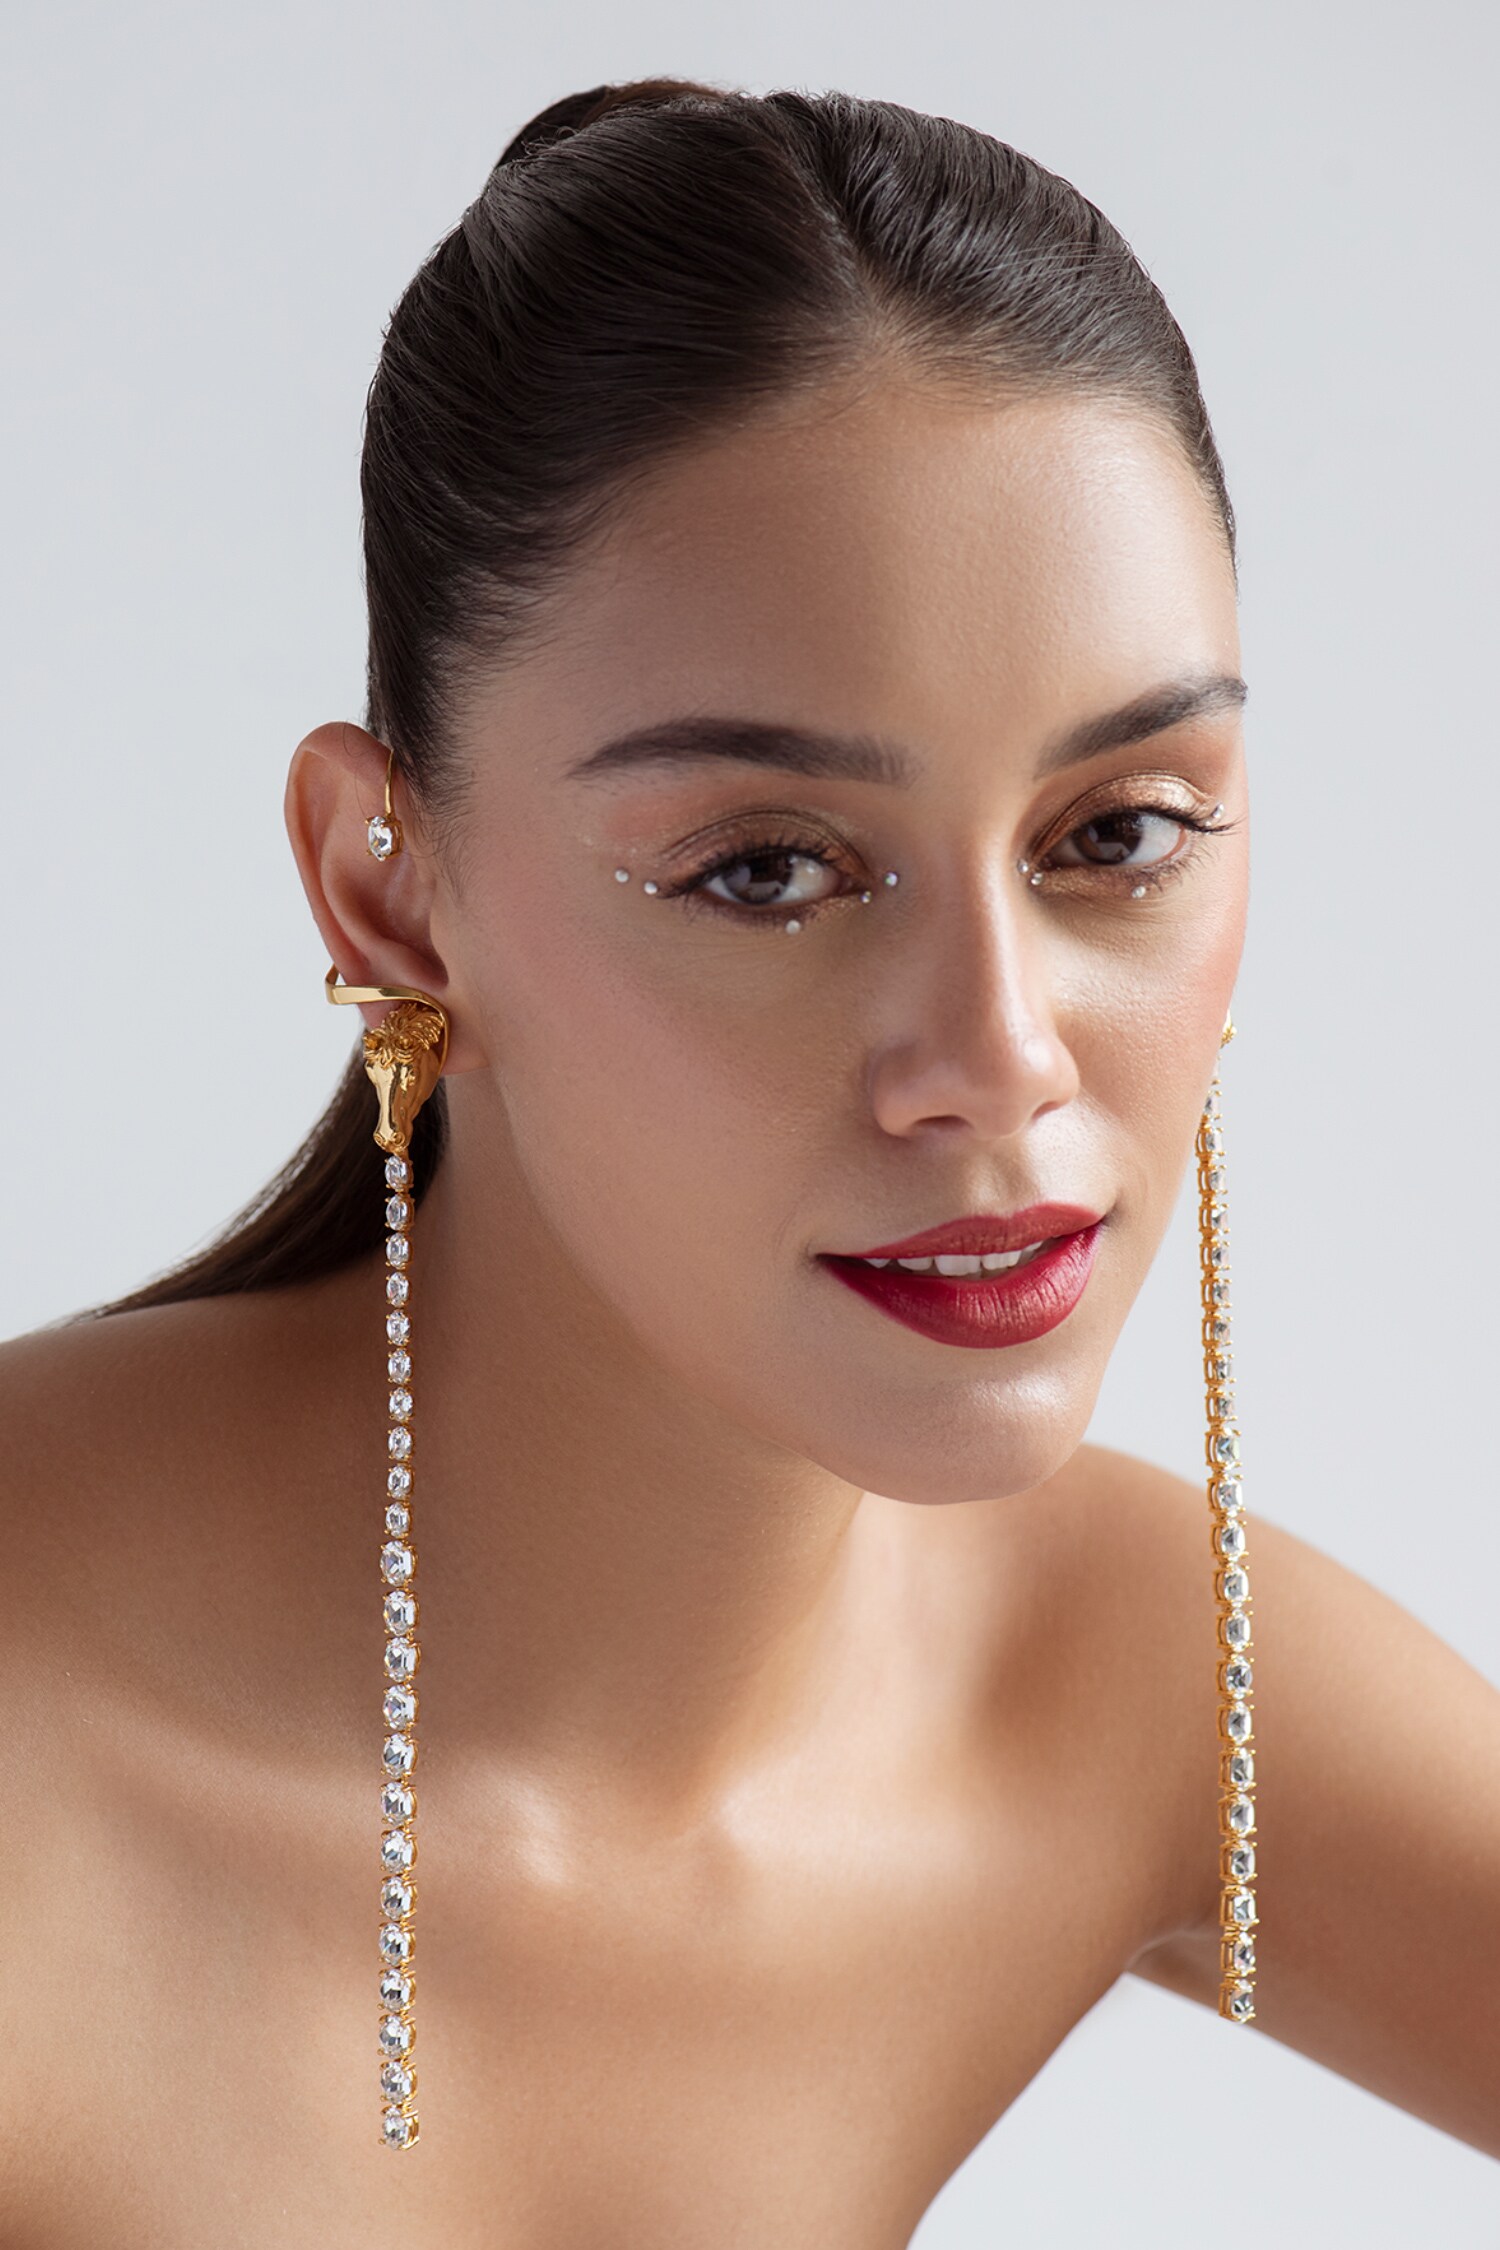 22K Gold Earrings - Ear Cuffs with Cz - 235-GER14151 in 8.700 Grams-sgquangbinhtourist.com.vn